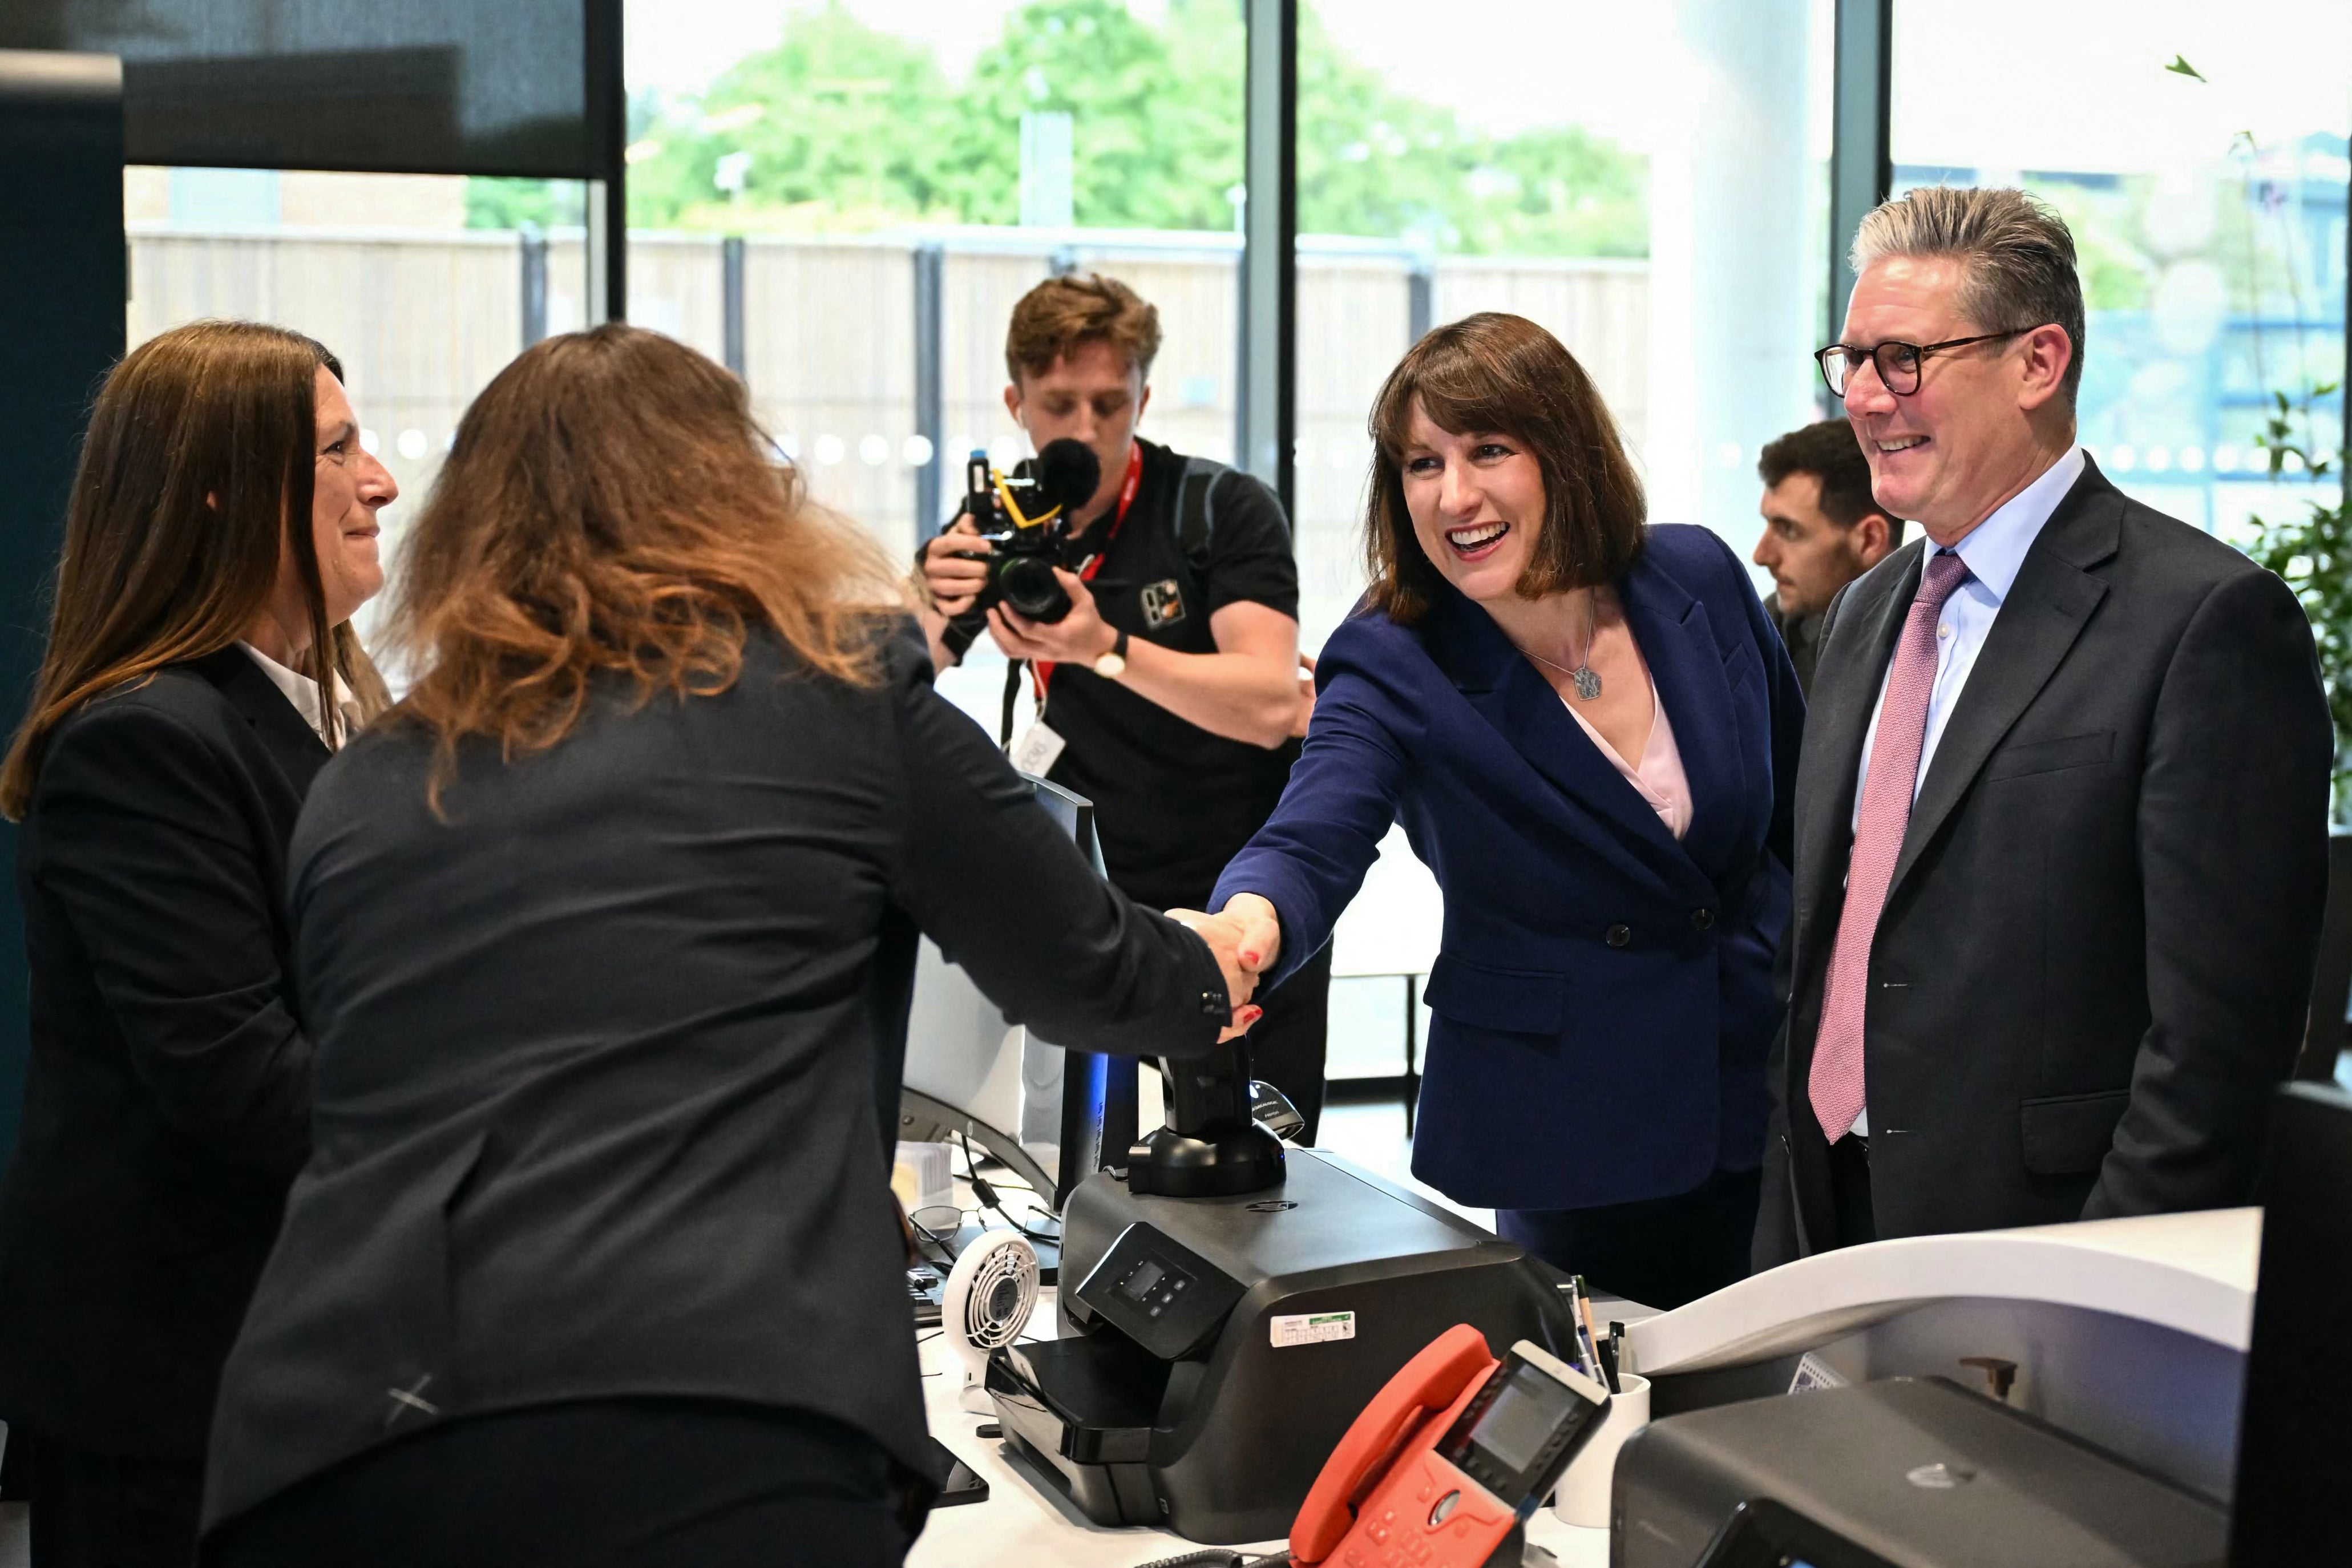 Keir Starmer and Rachel Reeves, on a tour of Stevenage’s Airbus facility as part of Labour’s general election campaign – days after Rishi Sunak made a visit to the constituency